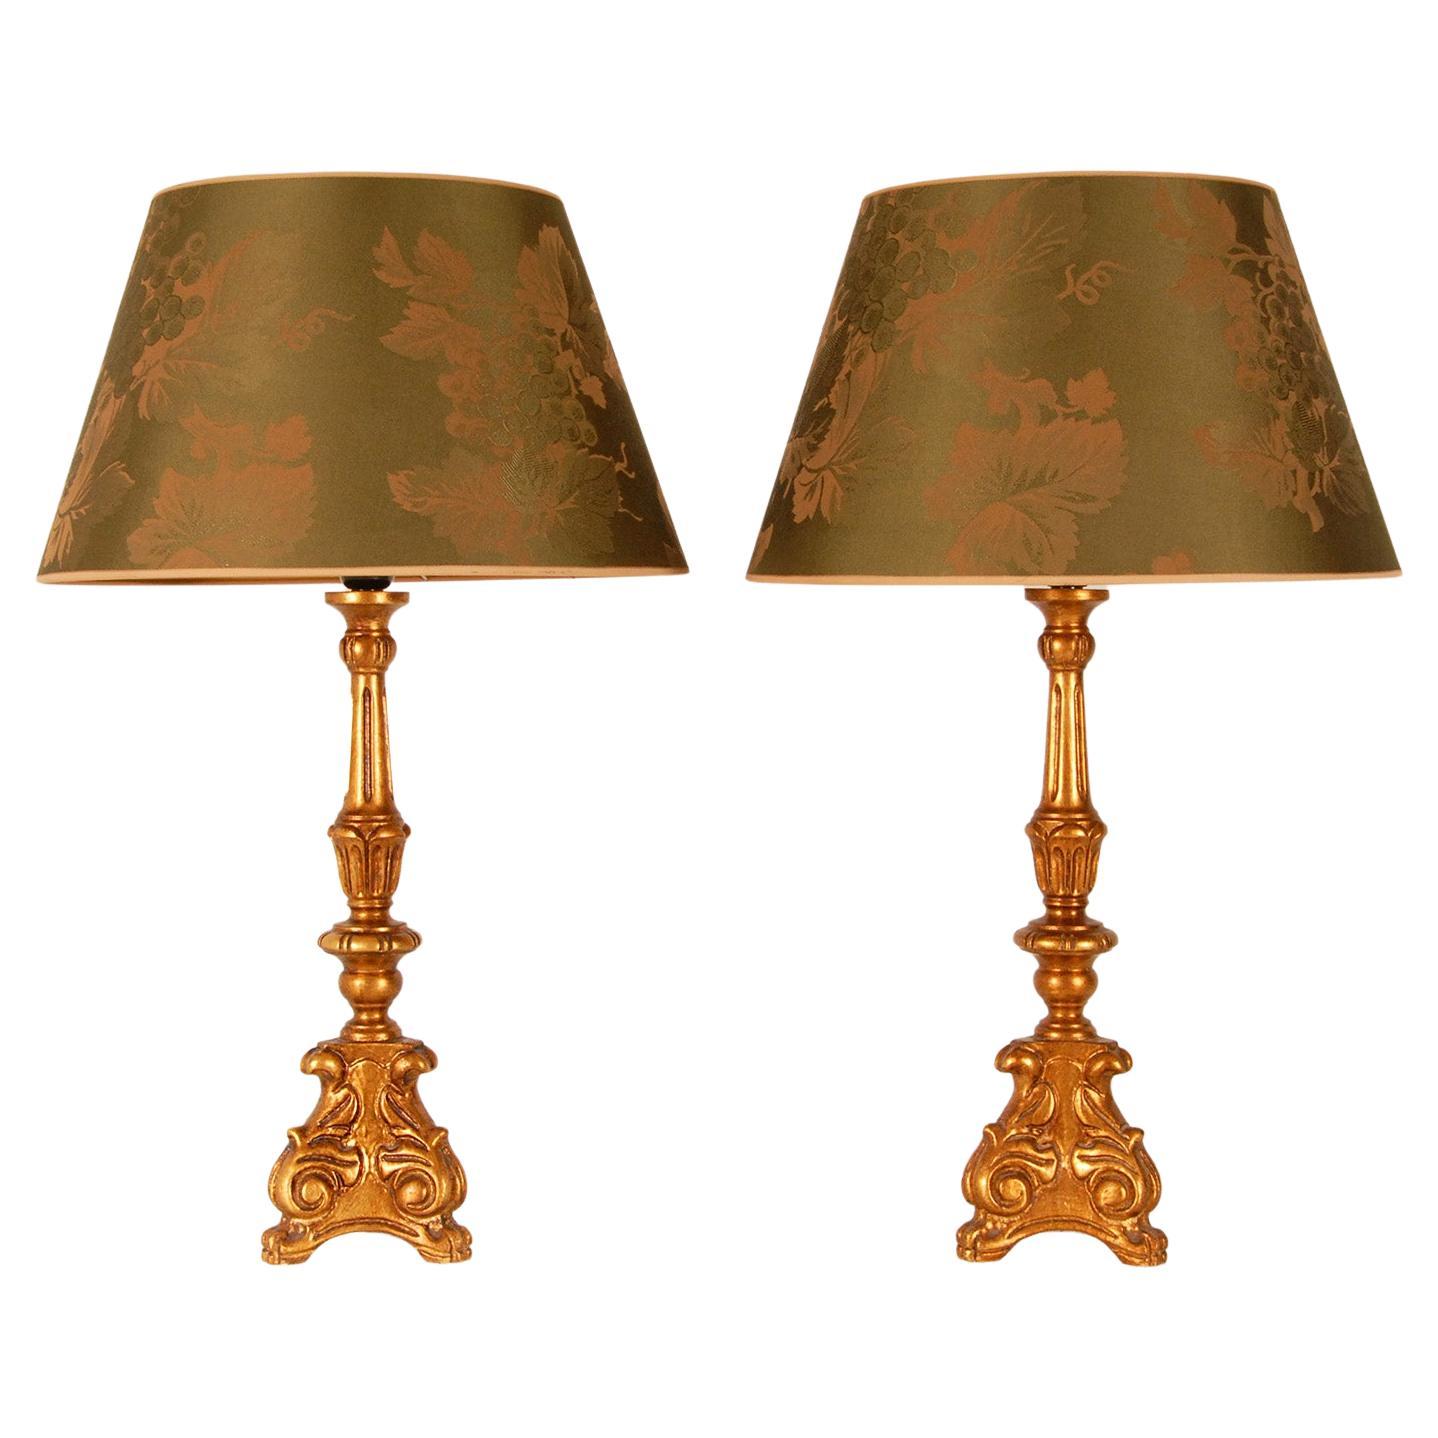 Vintage French Country Style Gold Giltwood Green Baroque Table Lamps, a Pair For Sale